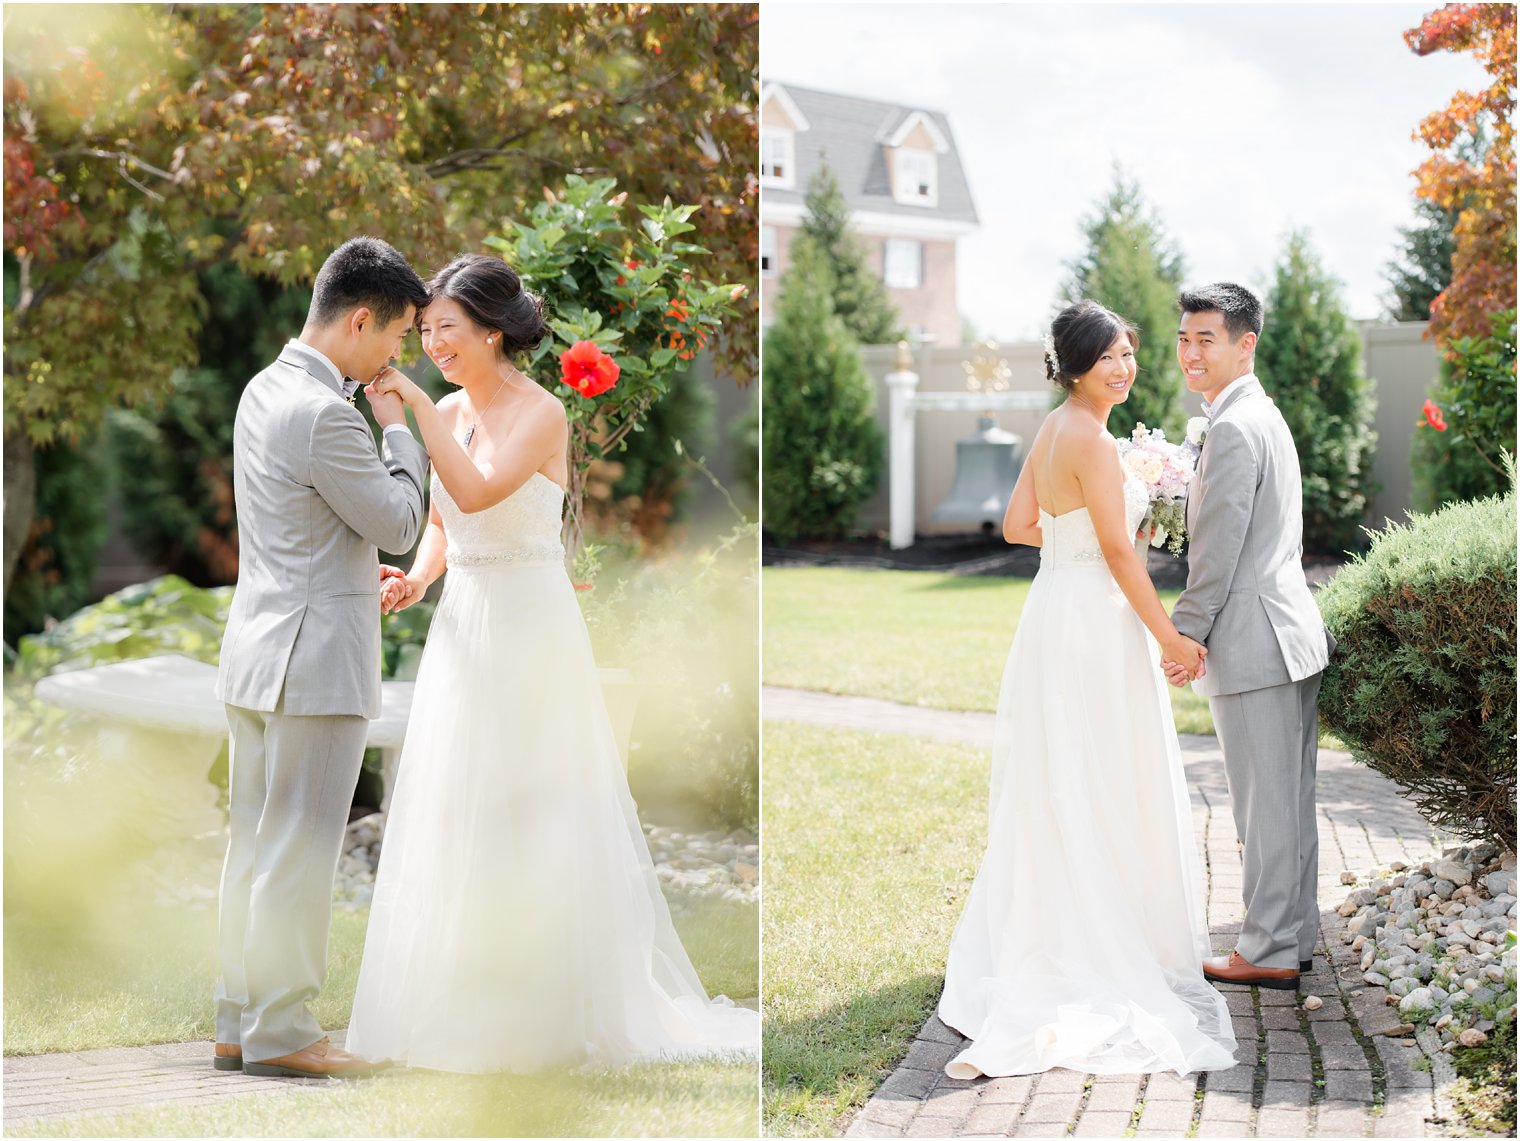 Groom gives bride a kiss during wedding portraits outside The Bethwood